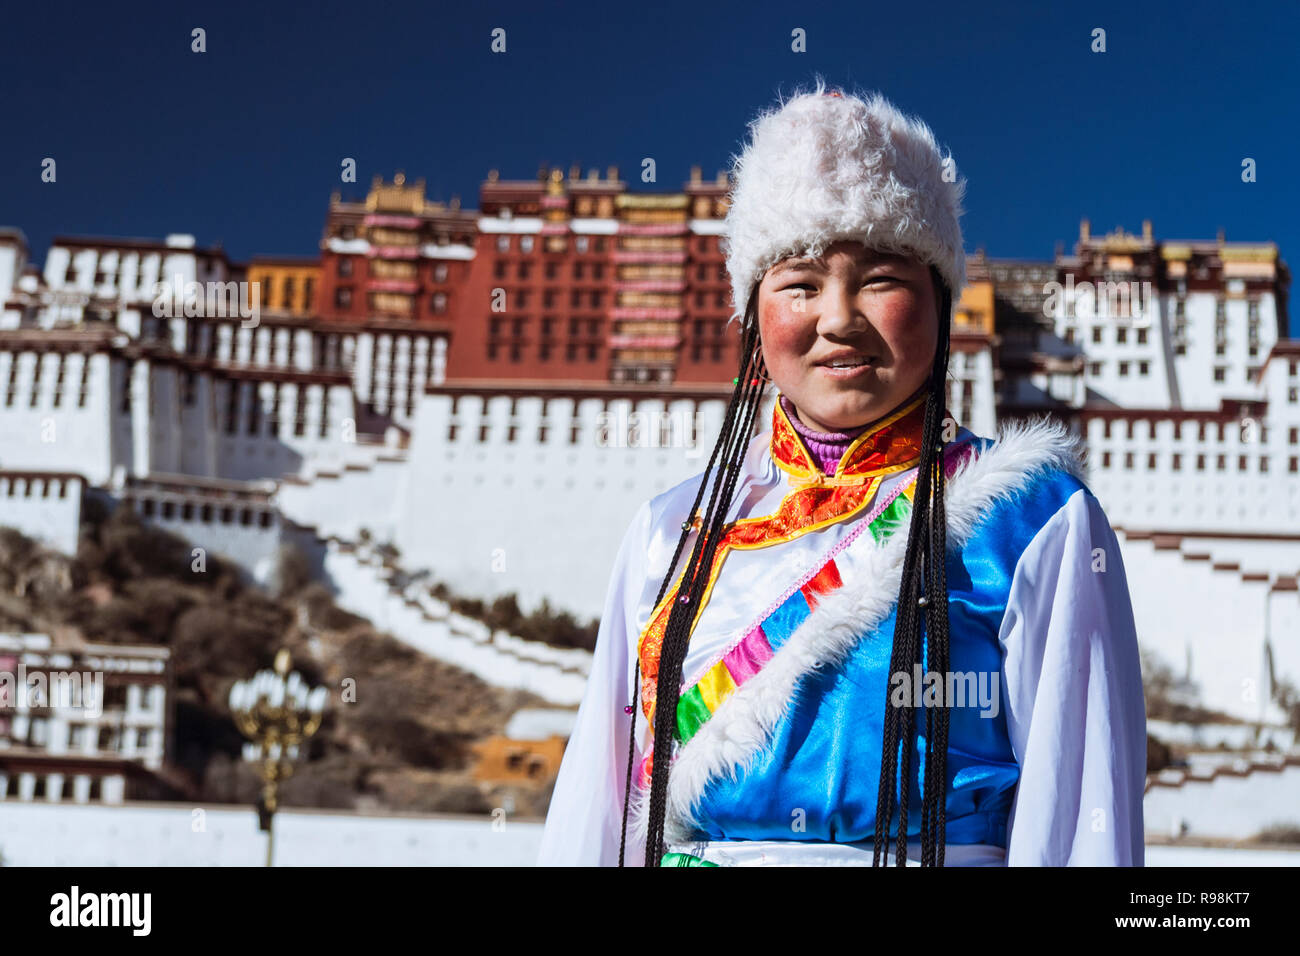 Lhasa, Tibet Autonomous Region, China : Young Tibetan women try out traditional costumes next to Potala palace. First built in 1645 by the 5th Dalai L Stock Photo